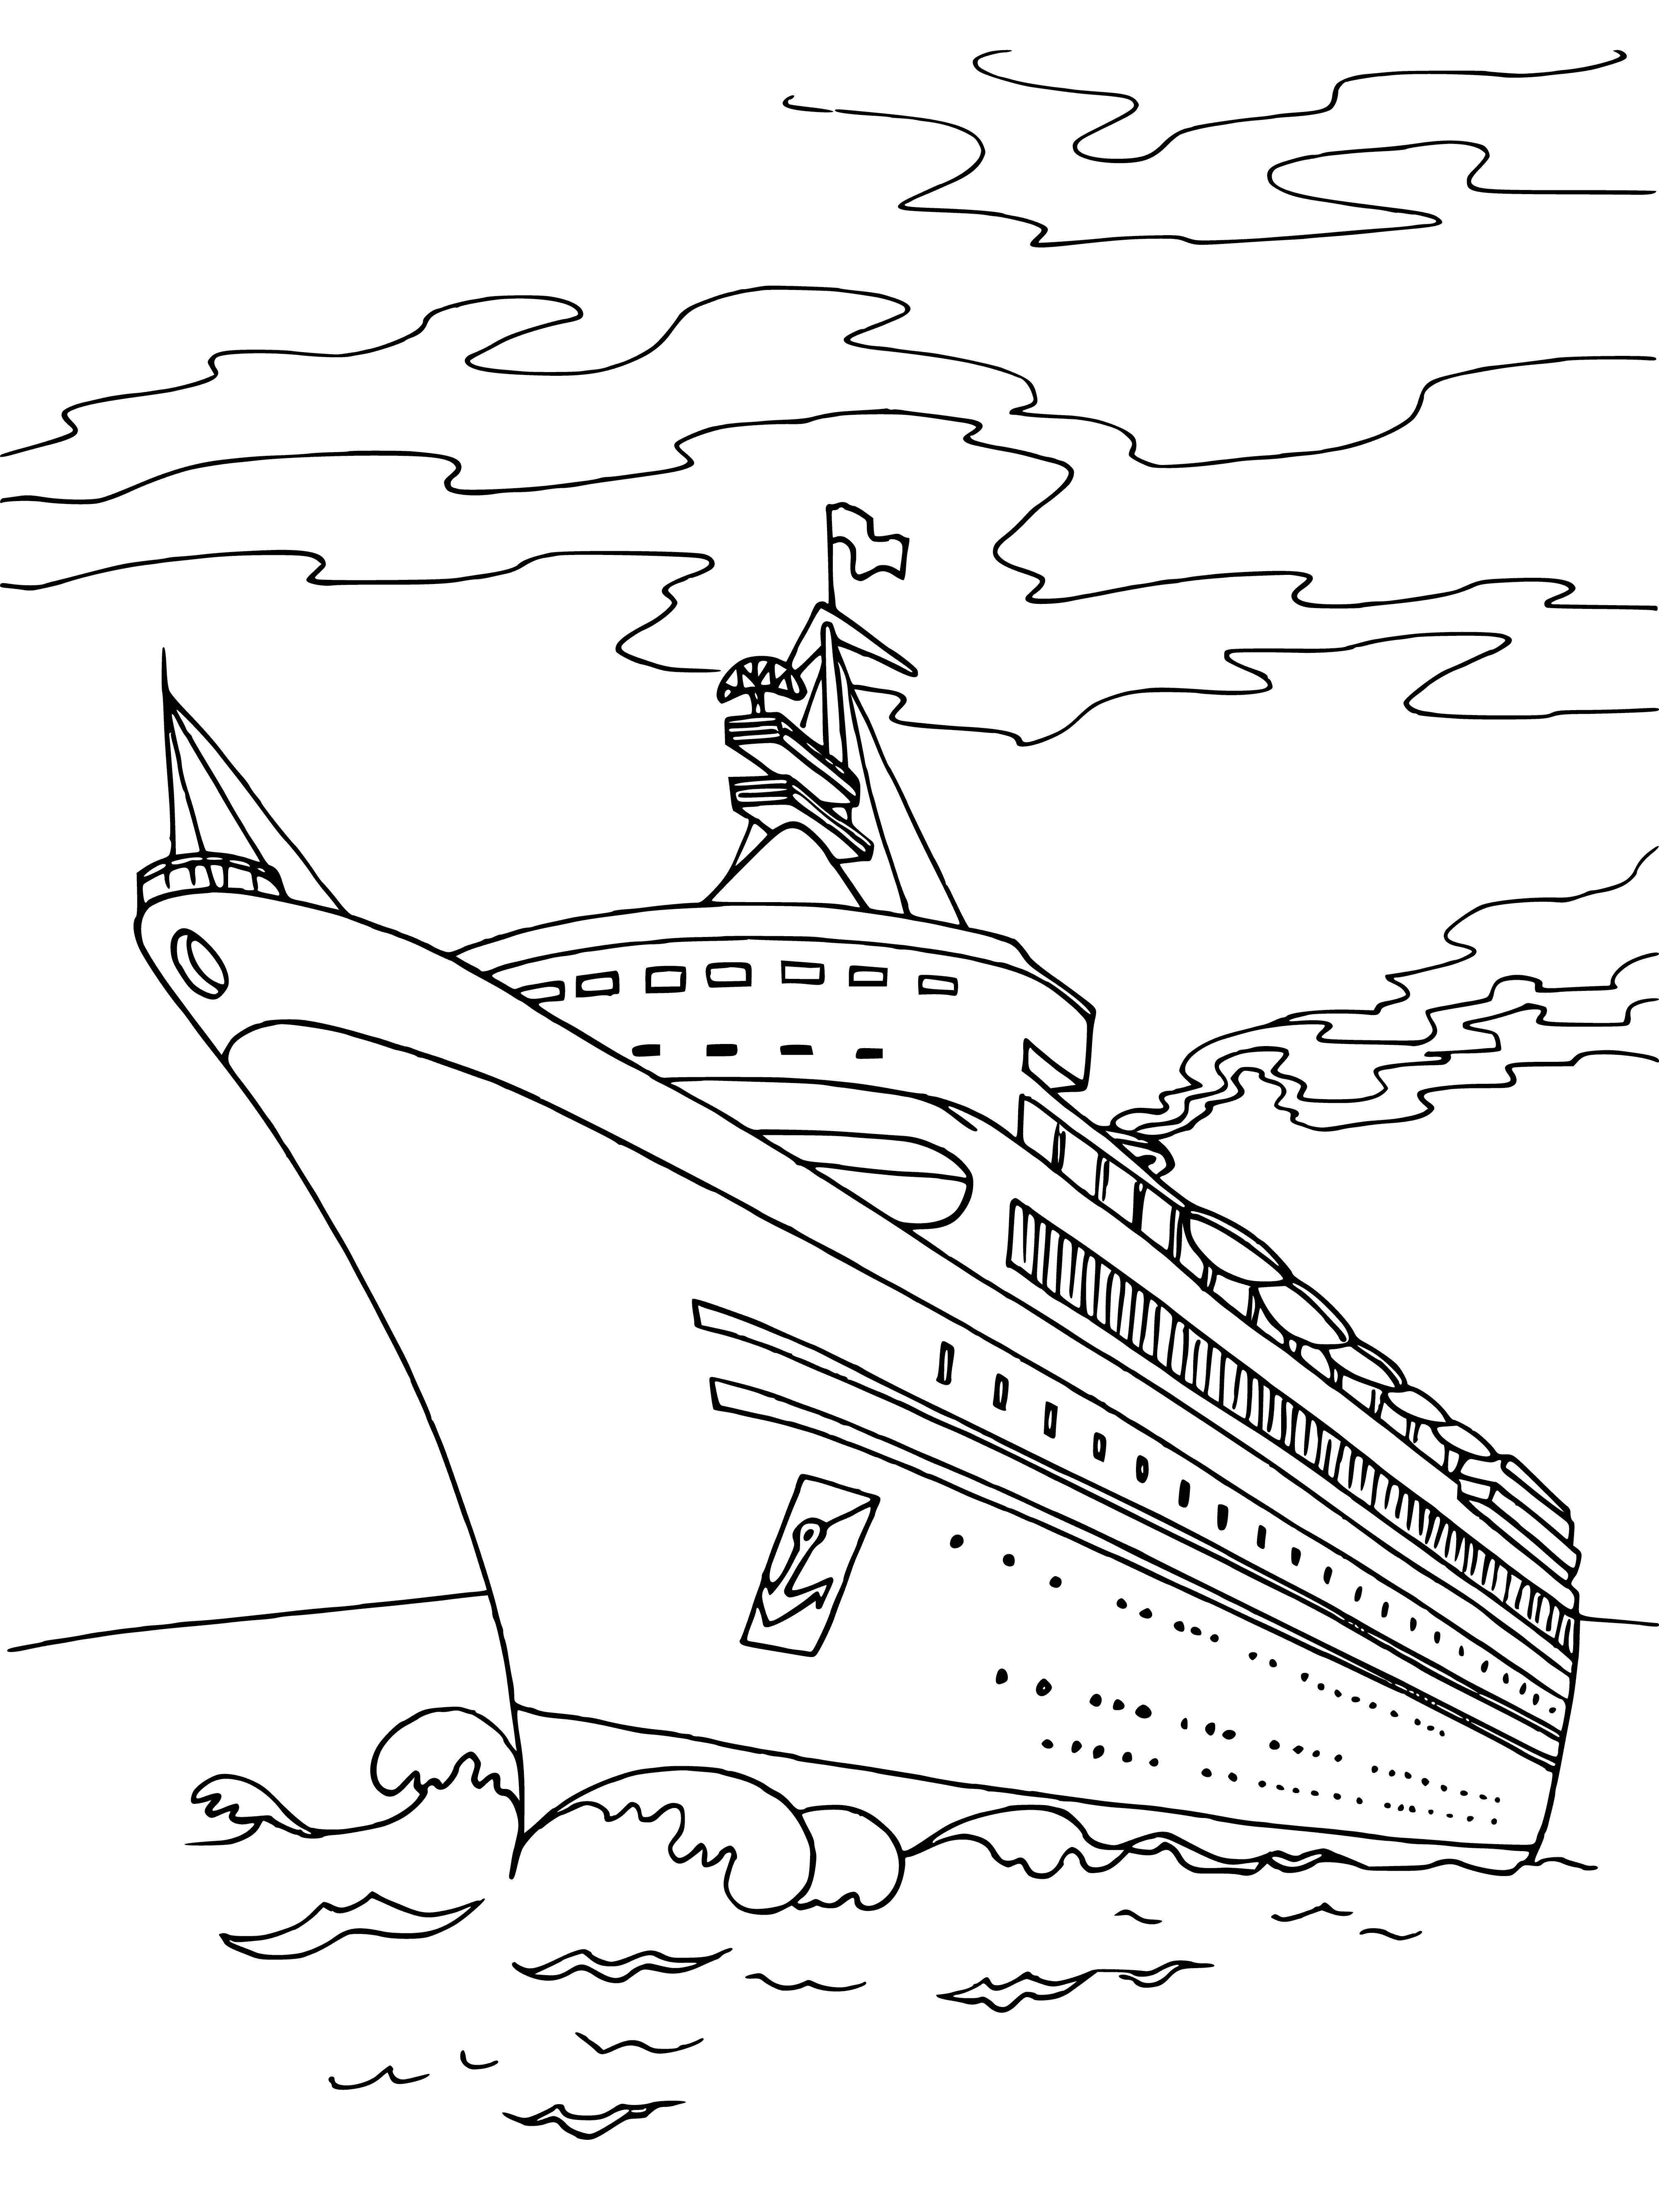 A cruise ship coloring page